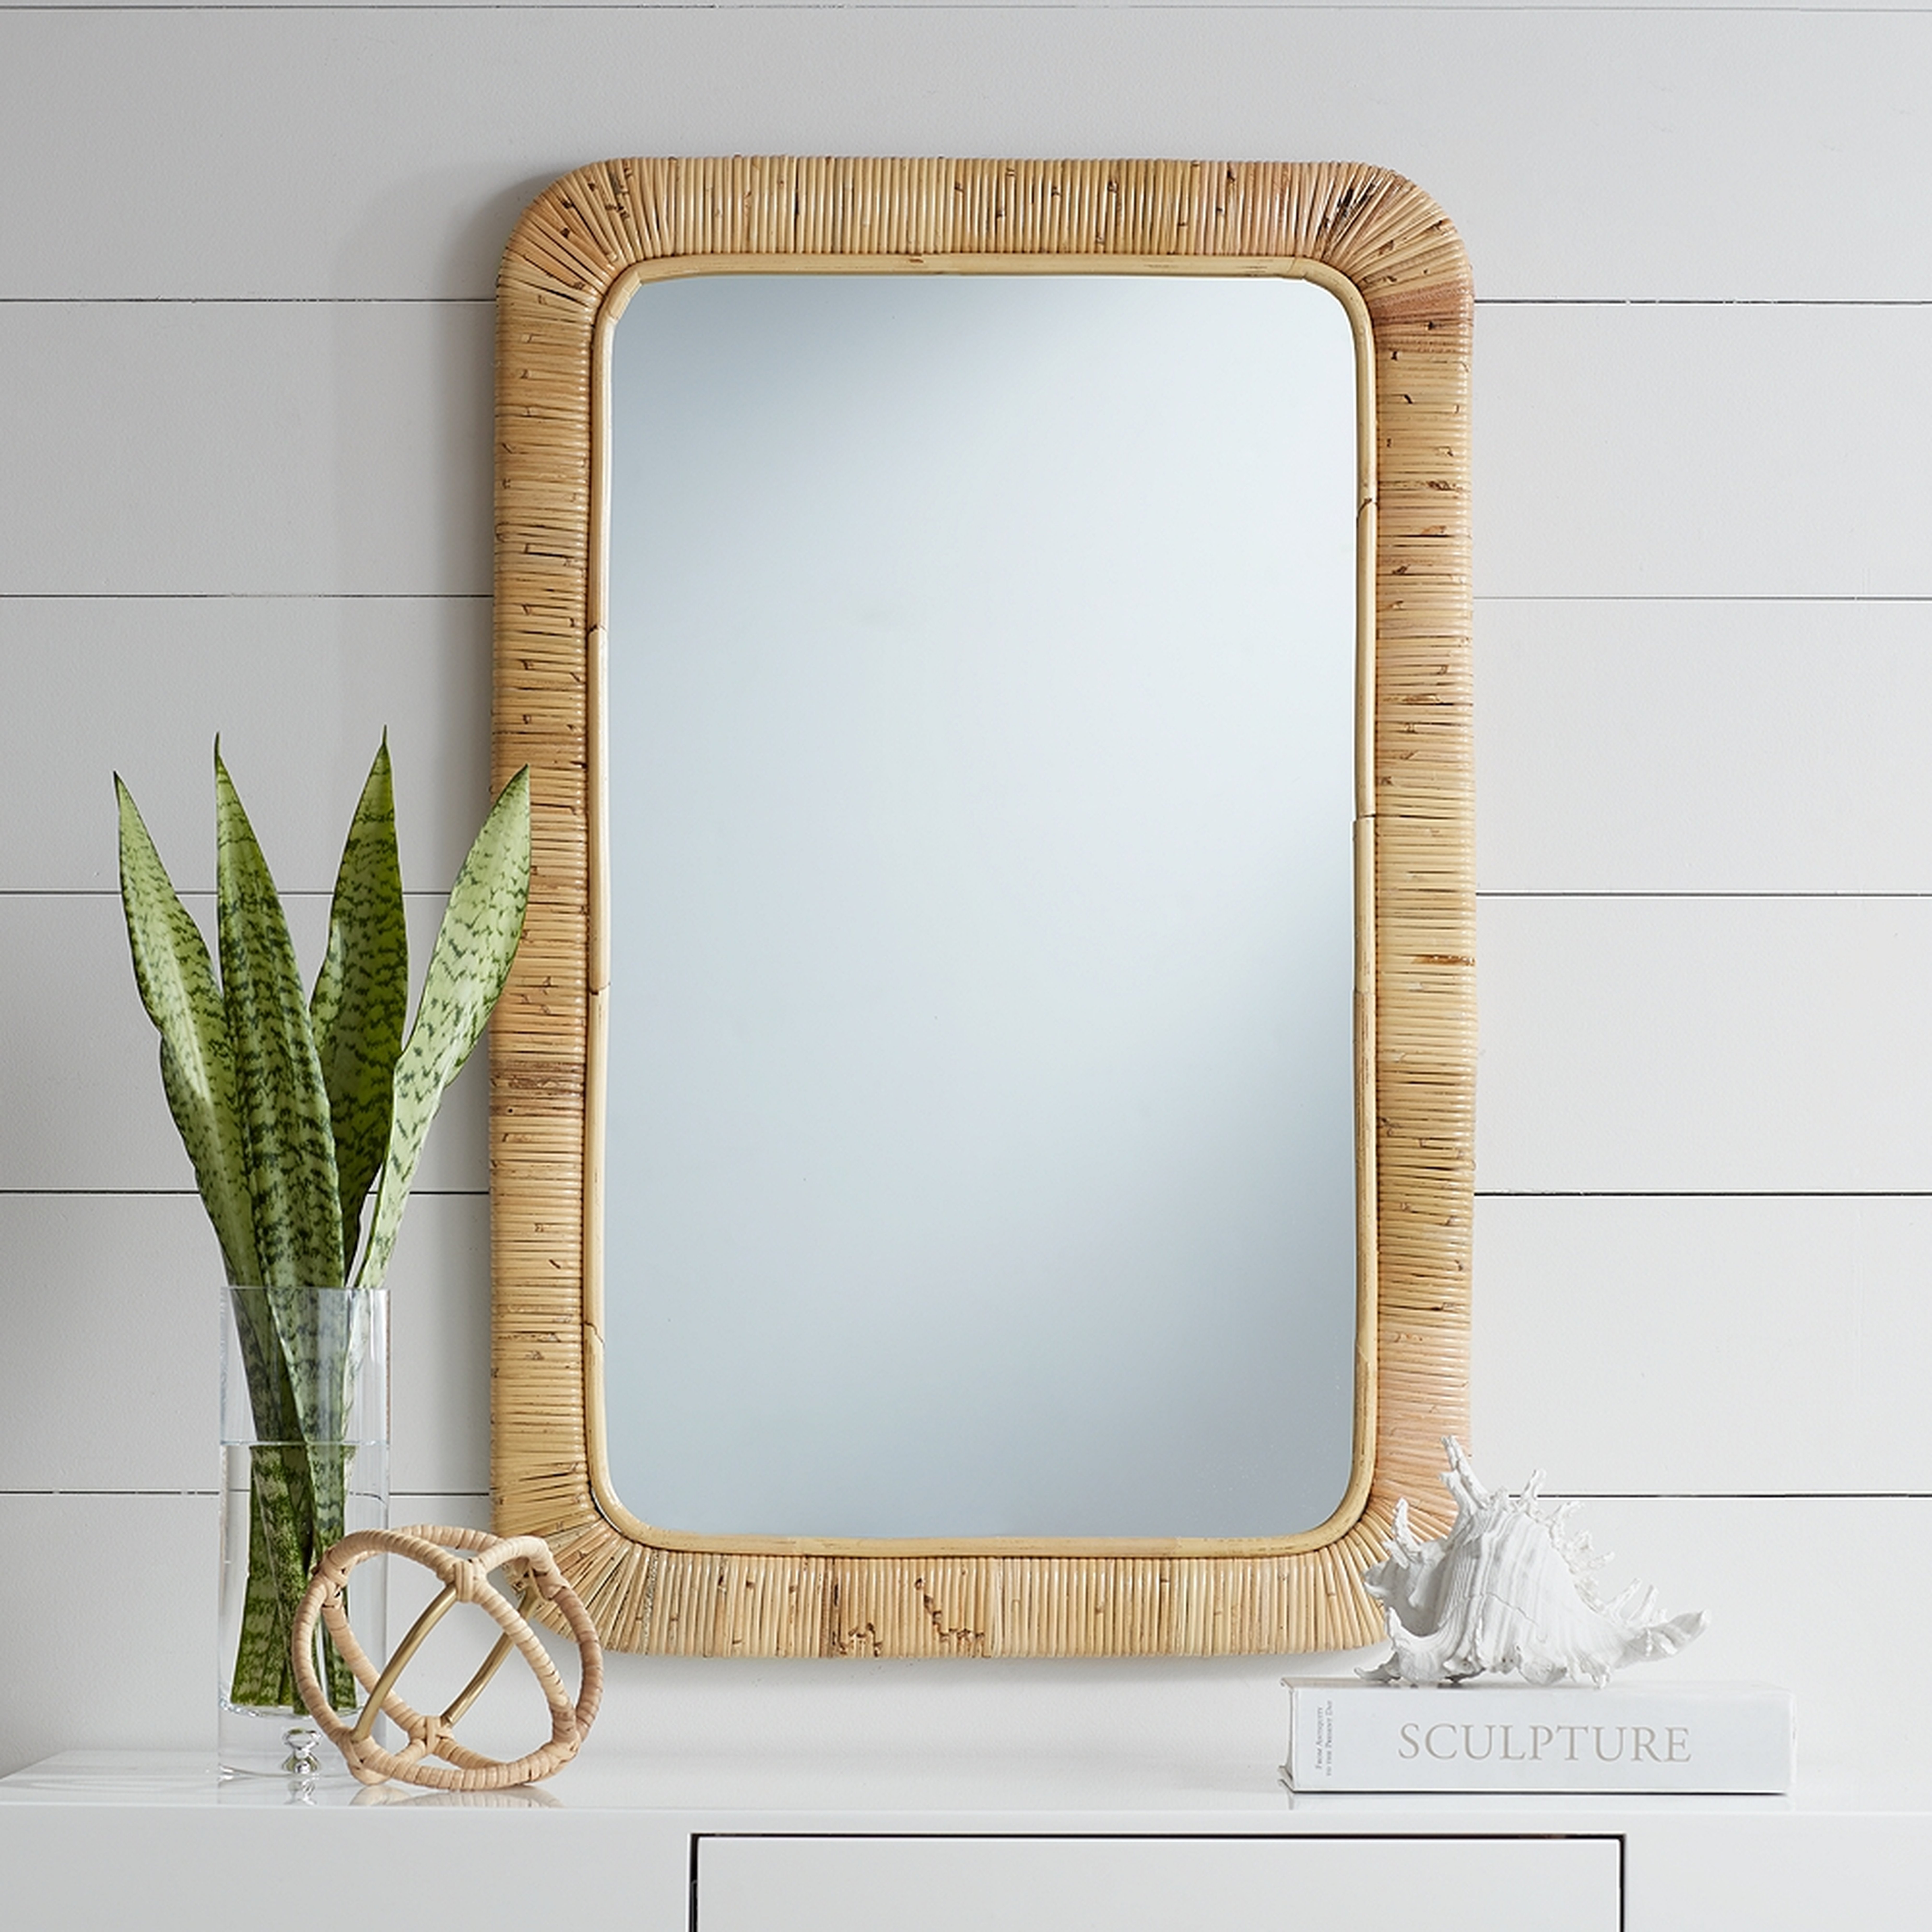 Westby 24" x 36" Rattan Wrapped Wall Mirror - Style # 75N25 - Lamps Plus